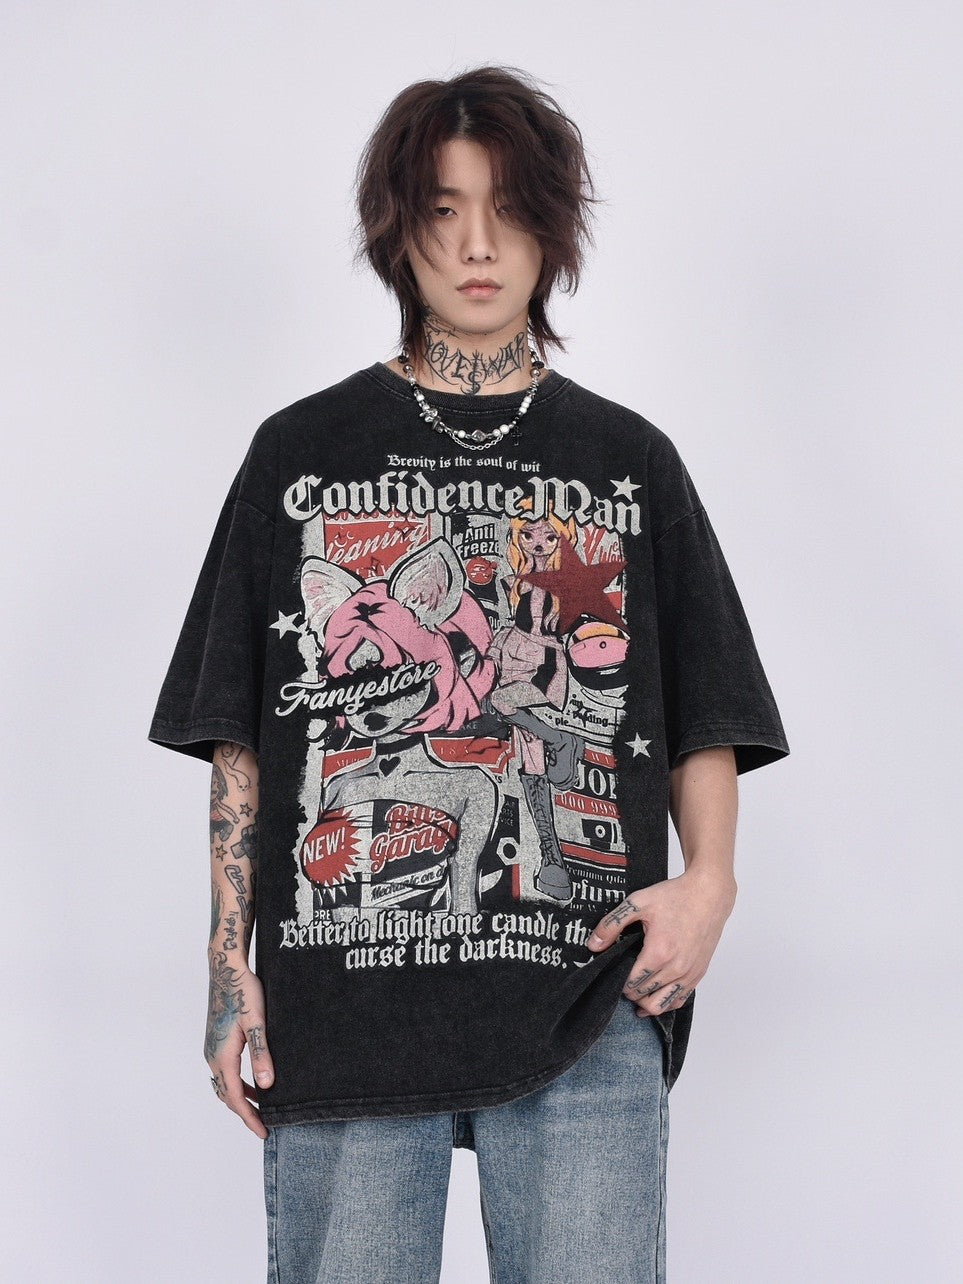 Confidence, Man T-Shirt. Vintage wash. y2k aesthetic streetwear outfits eboy 